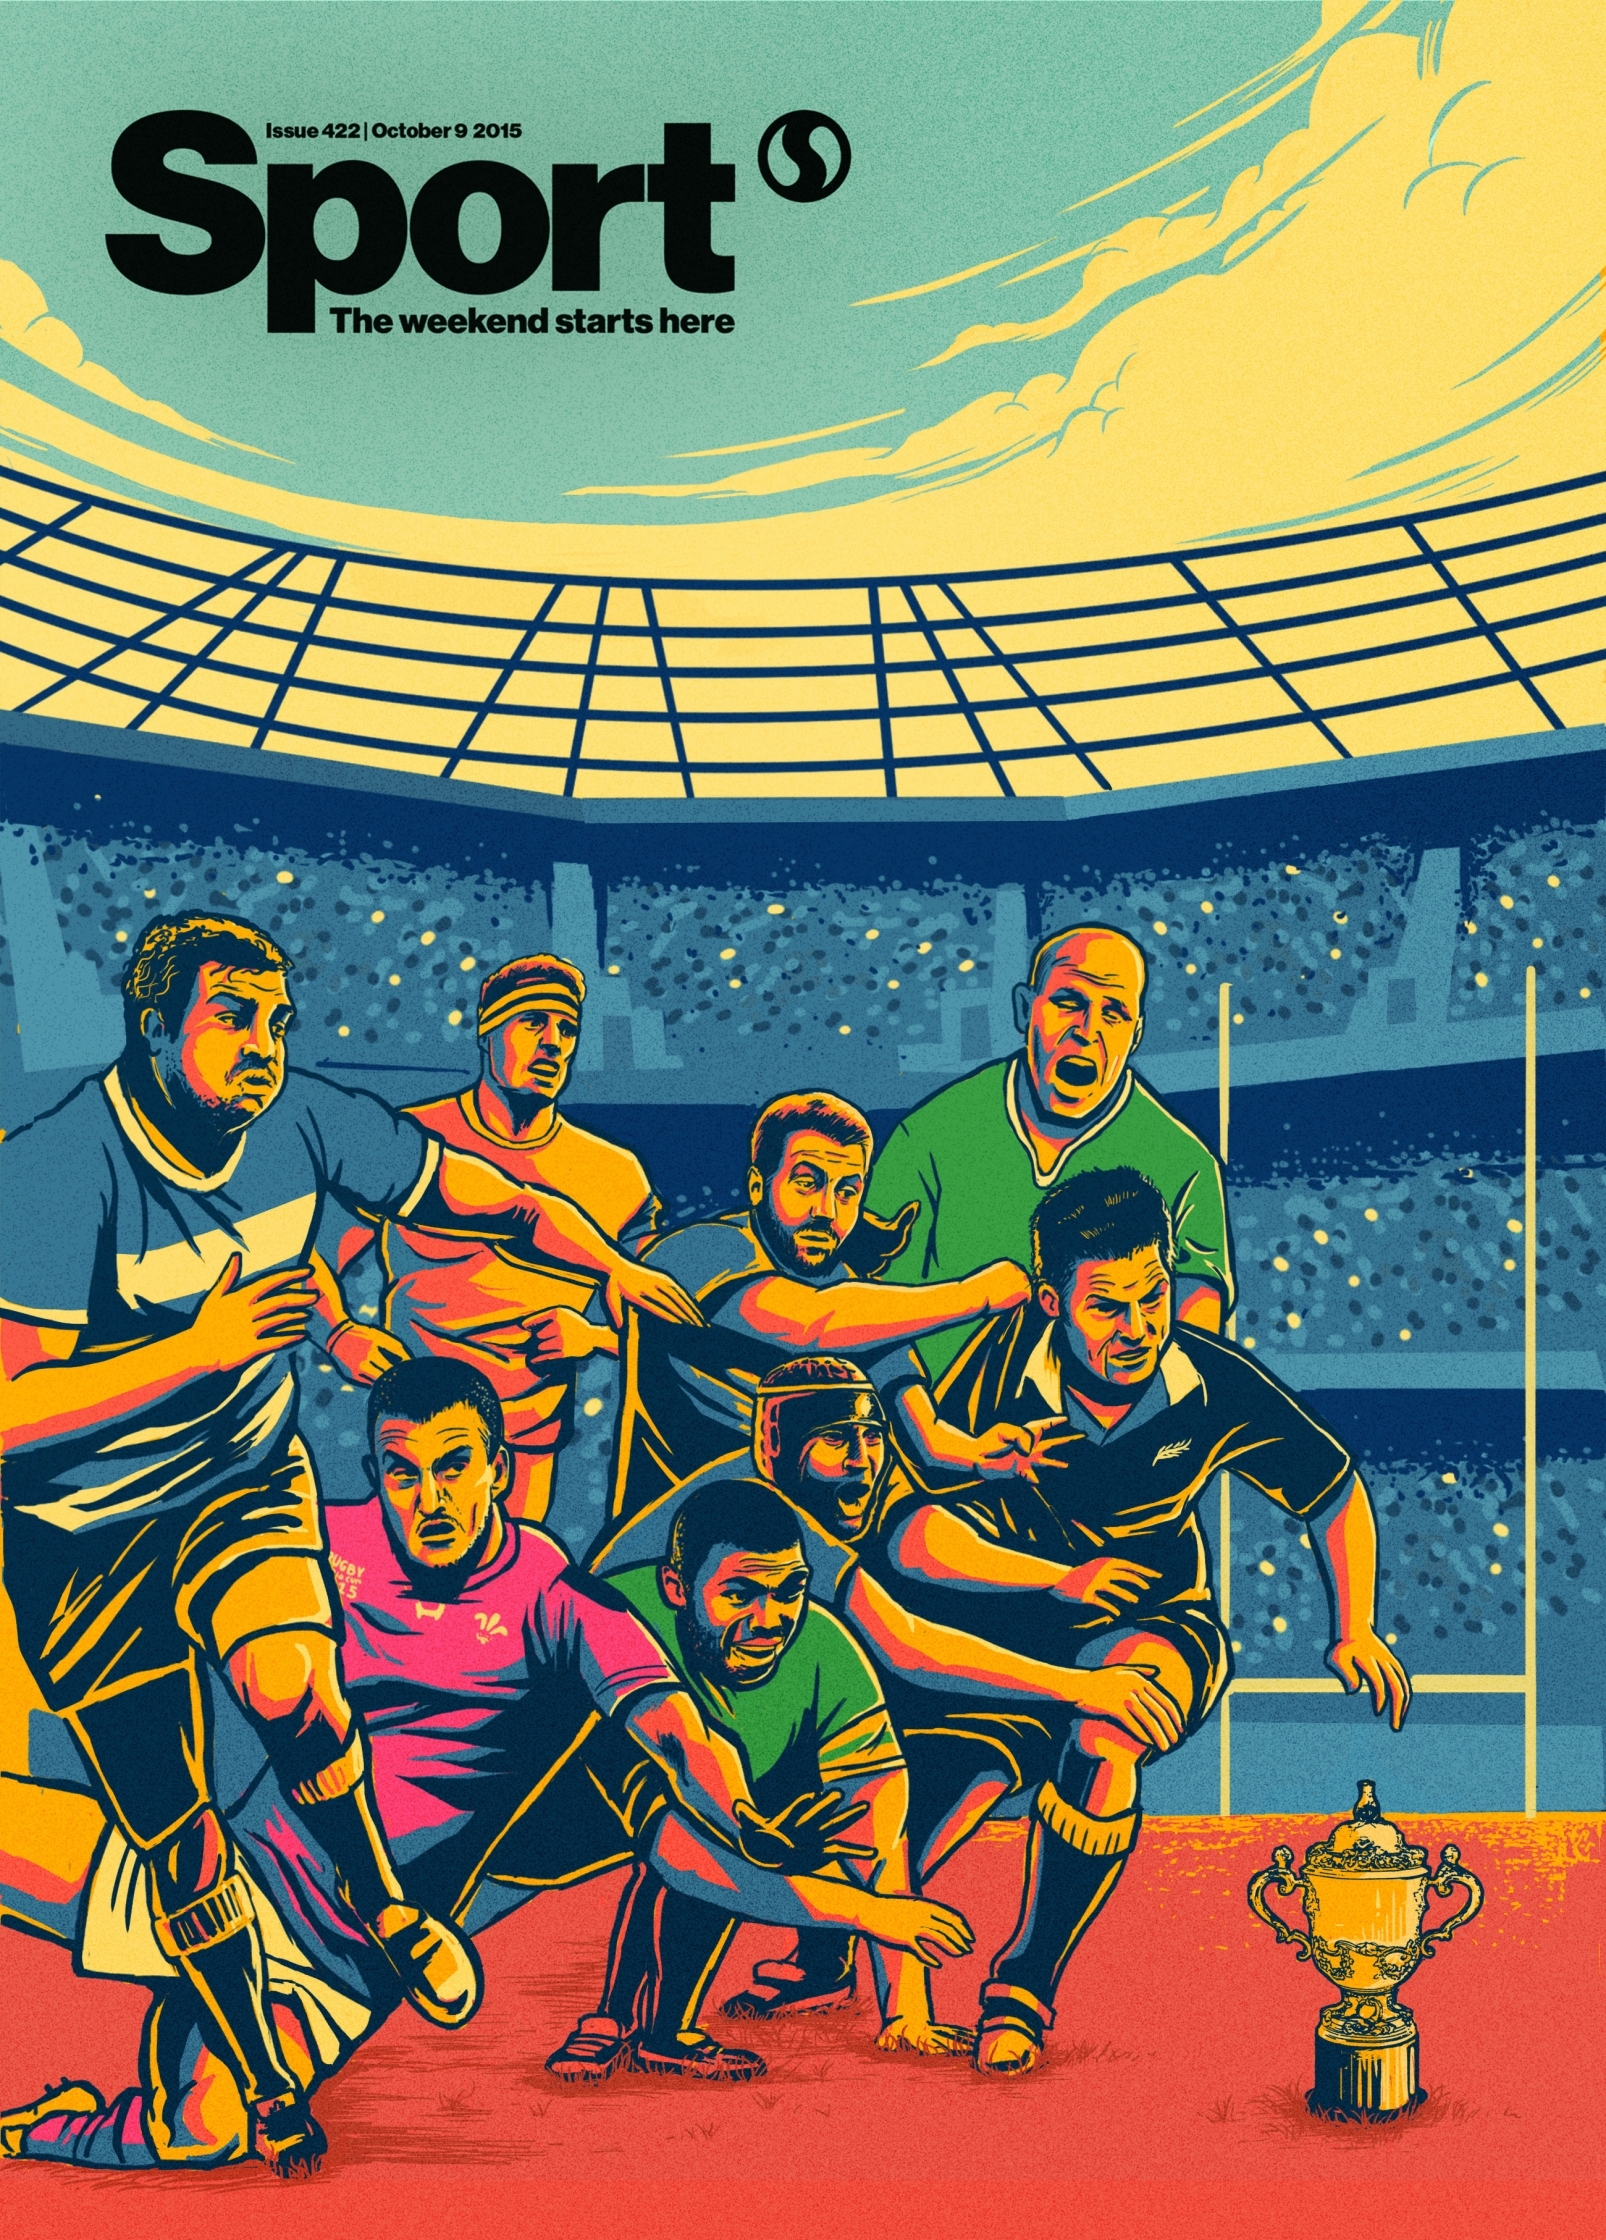 Sport Magazine Cover_Rugby World Cup 2015 W.jpg